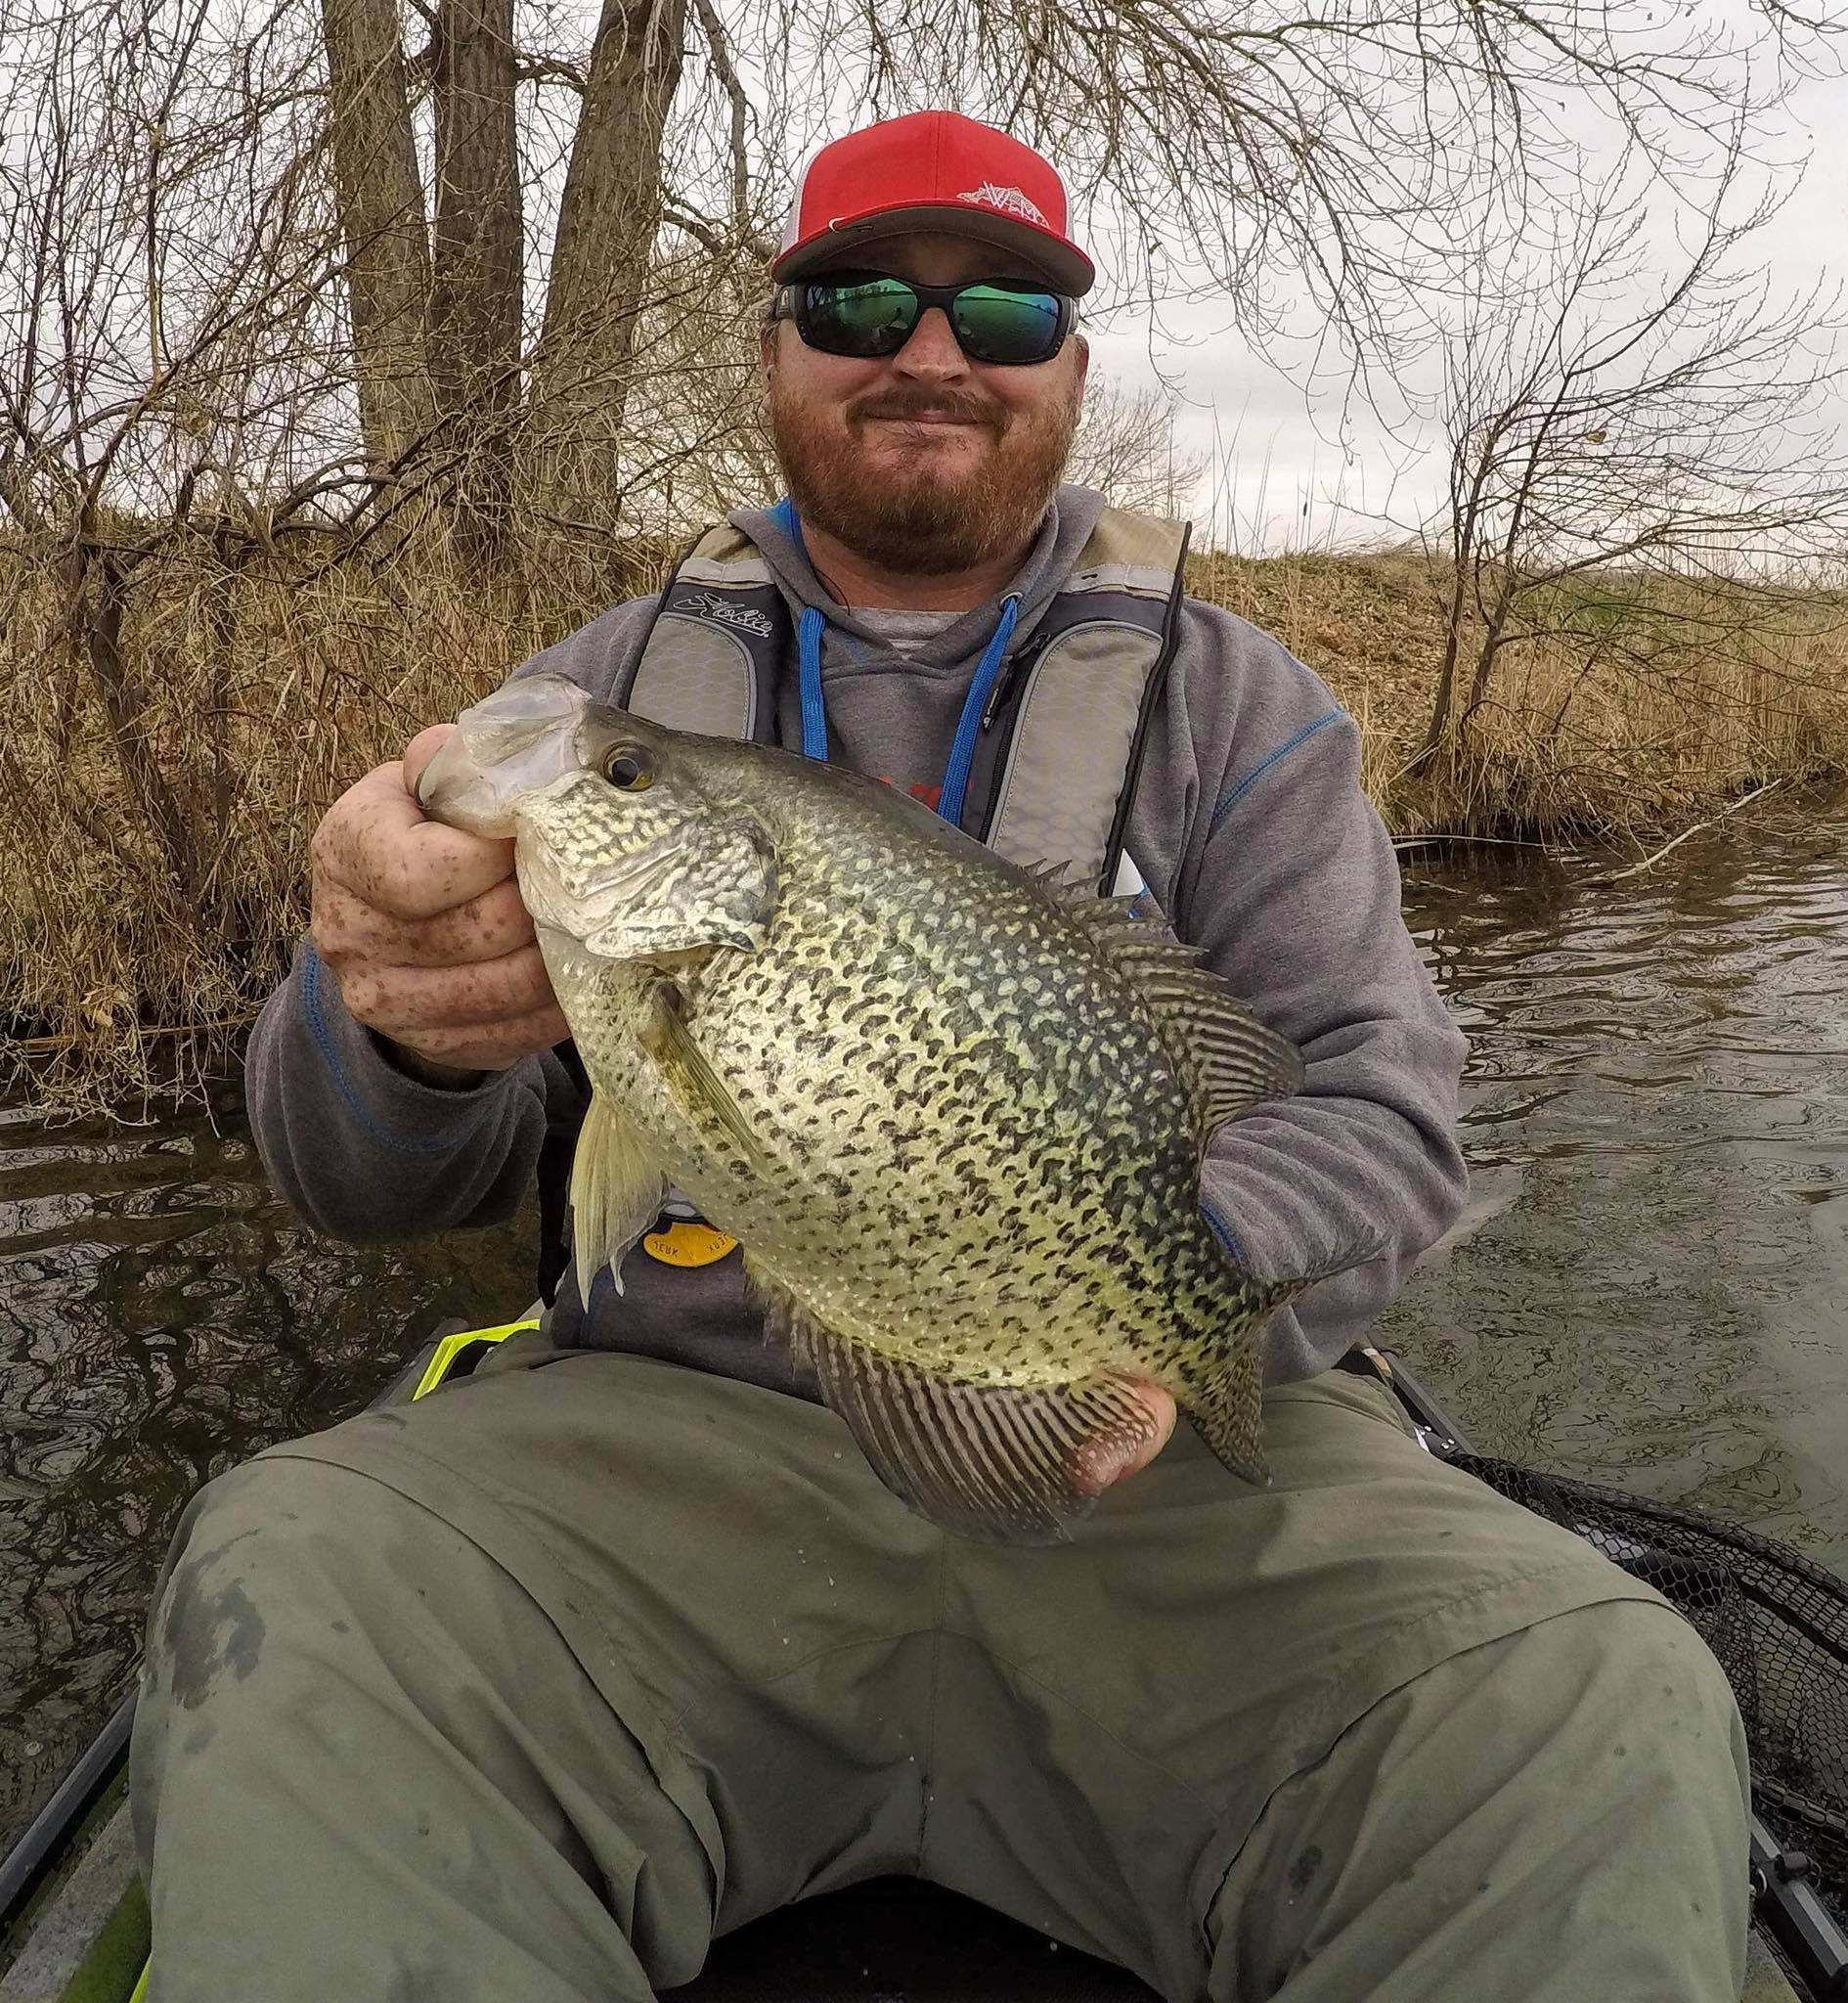 Monster crappie every cast! 